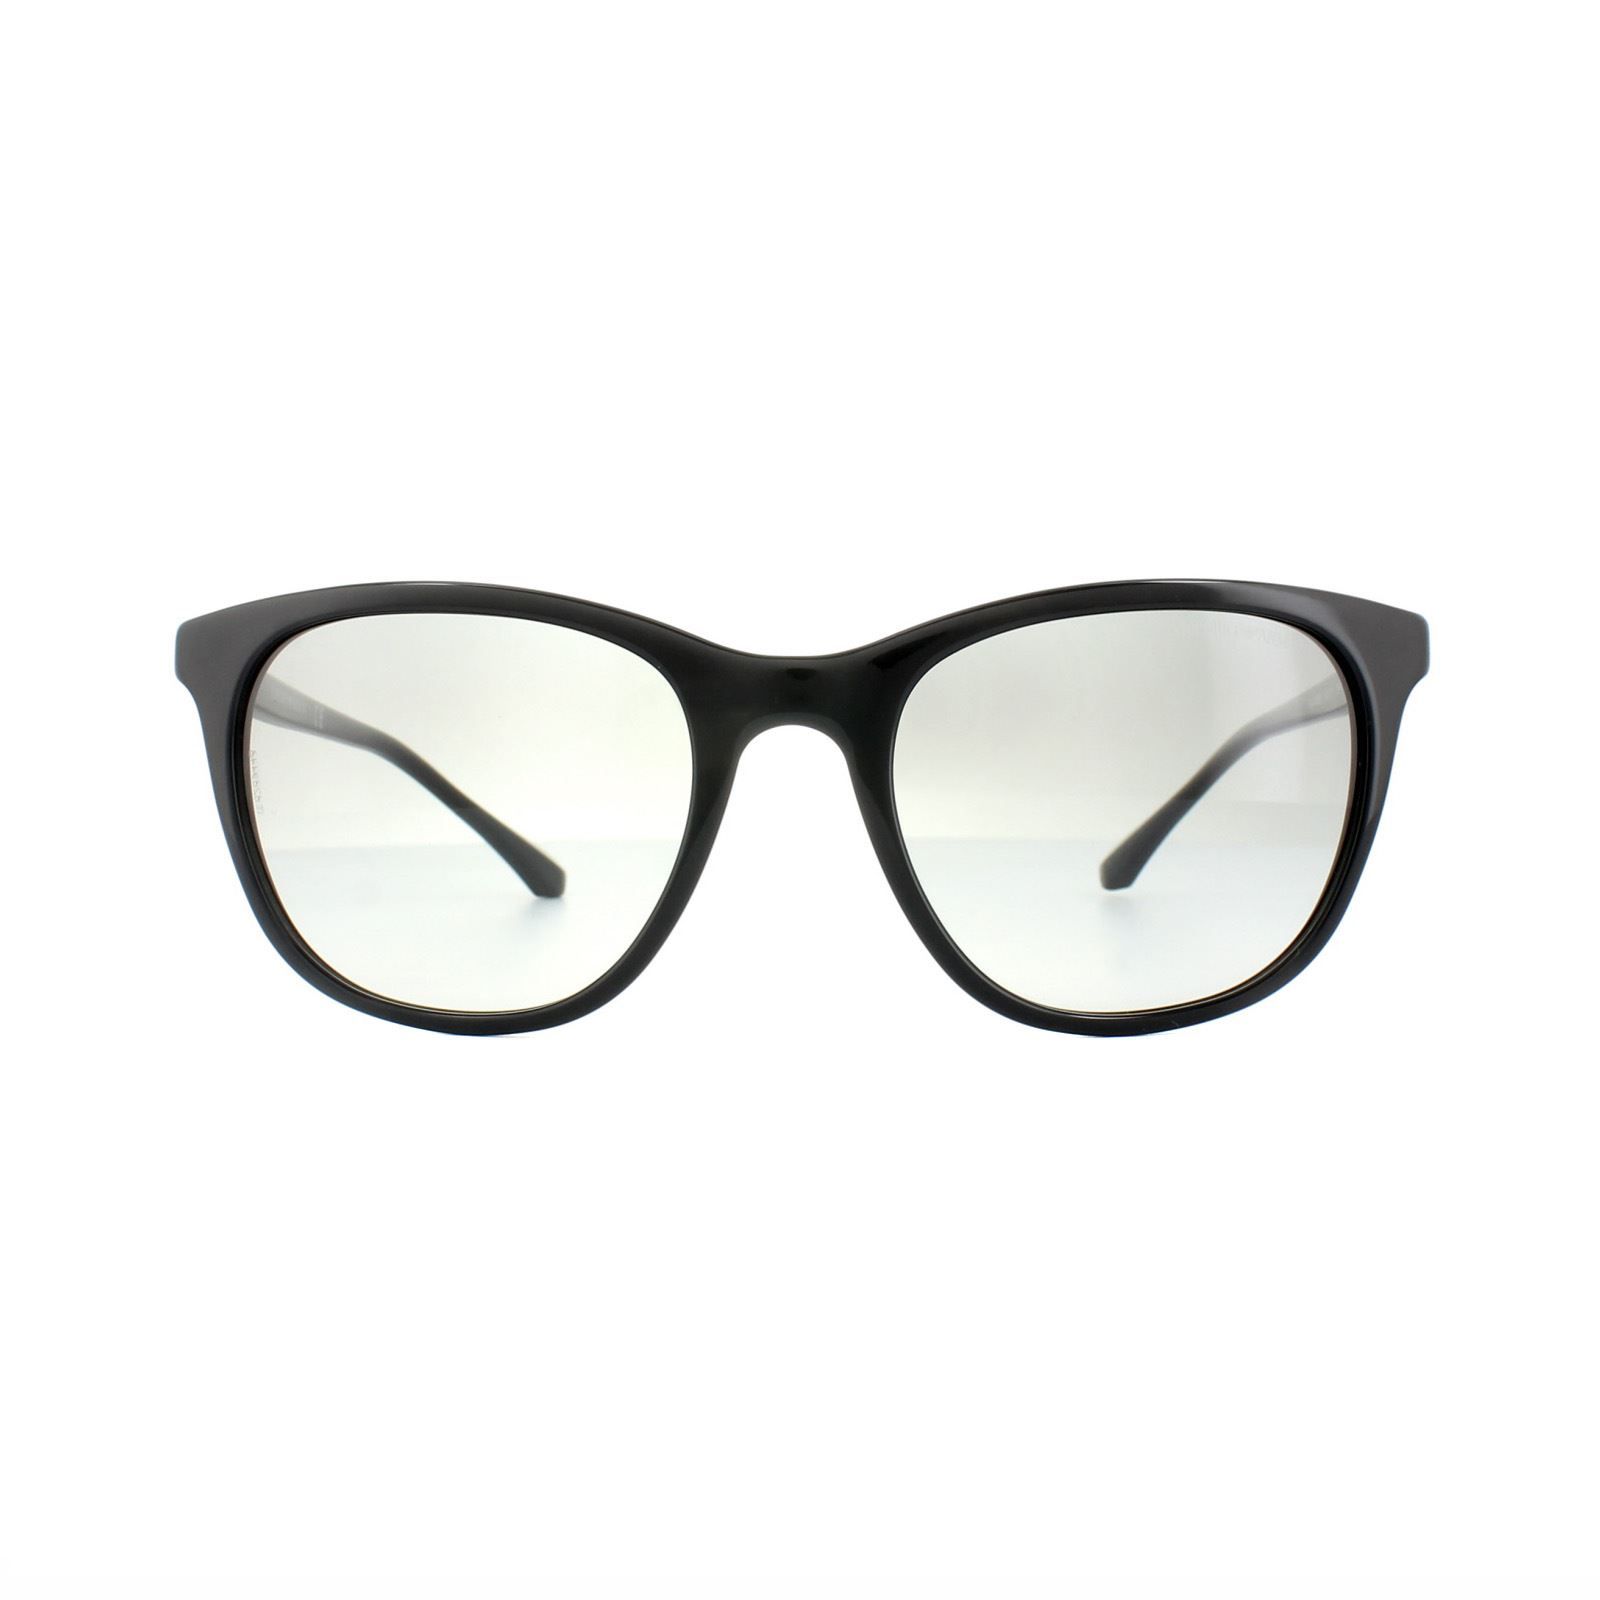 Emporio Armani Sunglasses 4086 5017/11 Black Grey Gradient are a lightweight square shaped acetate frame with minimalist styling for a sleek smooth look that will look great for all occasions. A simple Armani eagle logo on the temples adds authenticity.